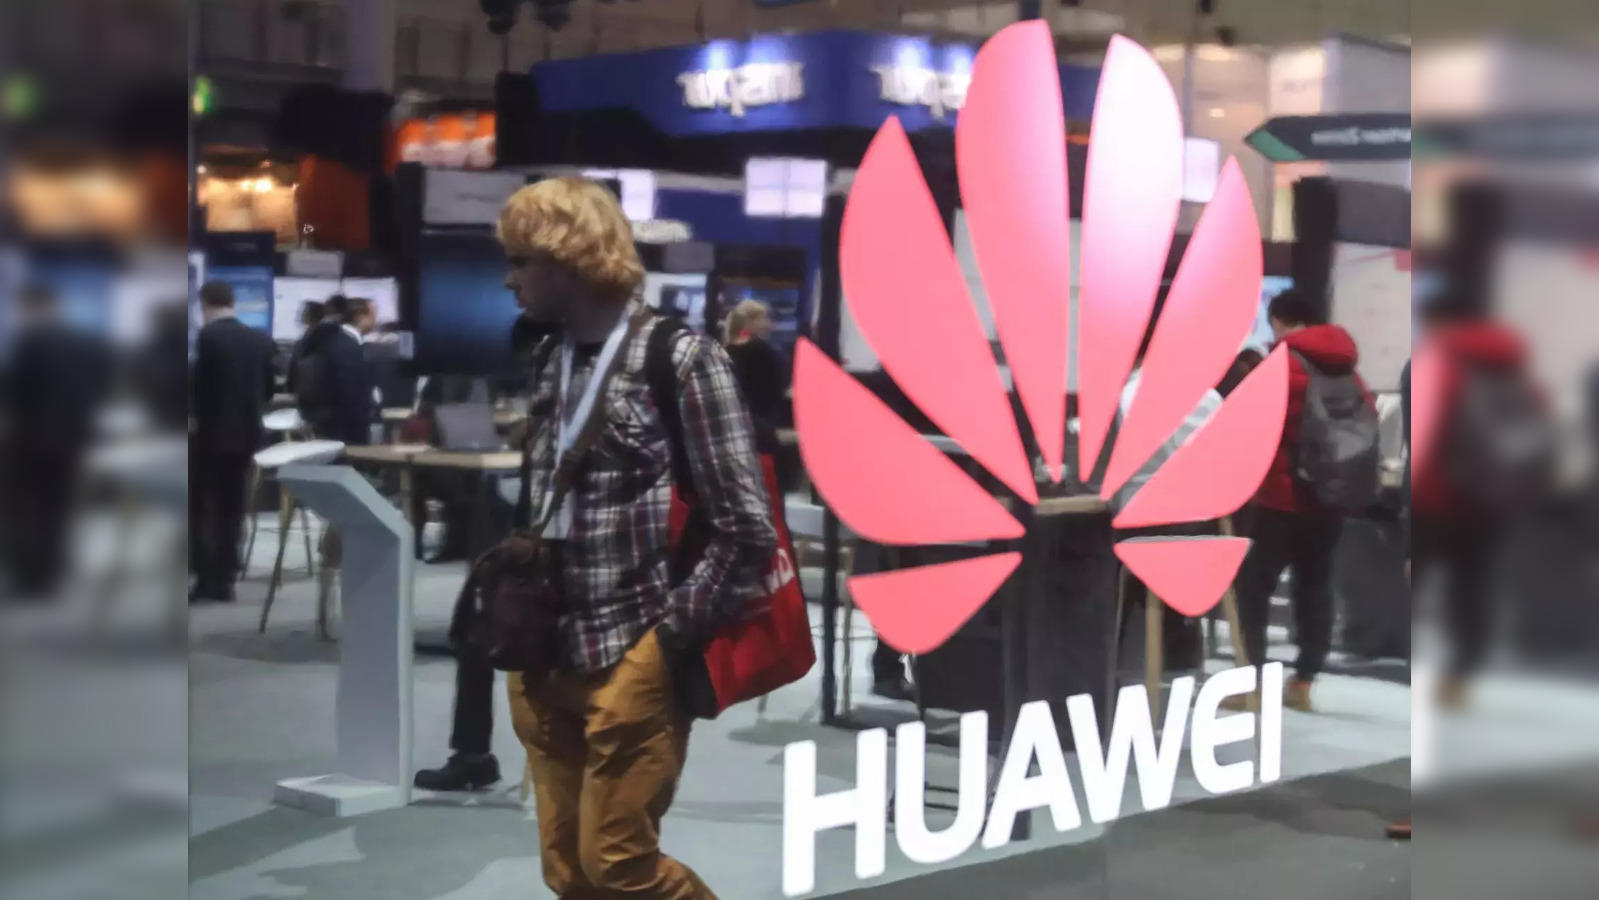 huawei revenue growth: Huawei forecasts 9% revenue growth in 2023 as smartphones  surge - The Economic Times